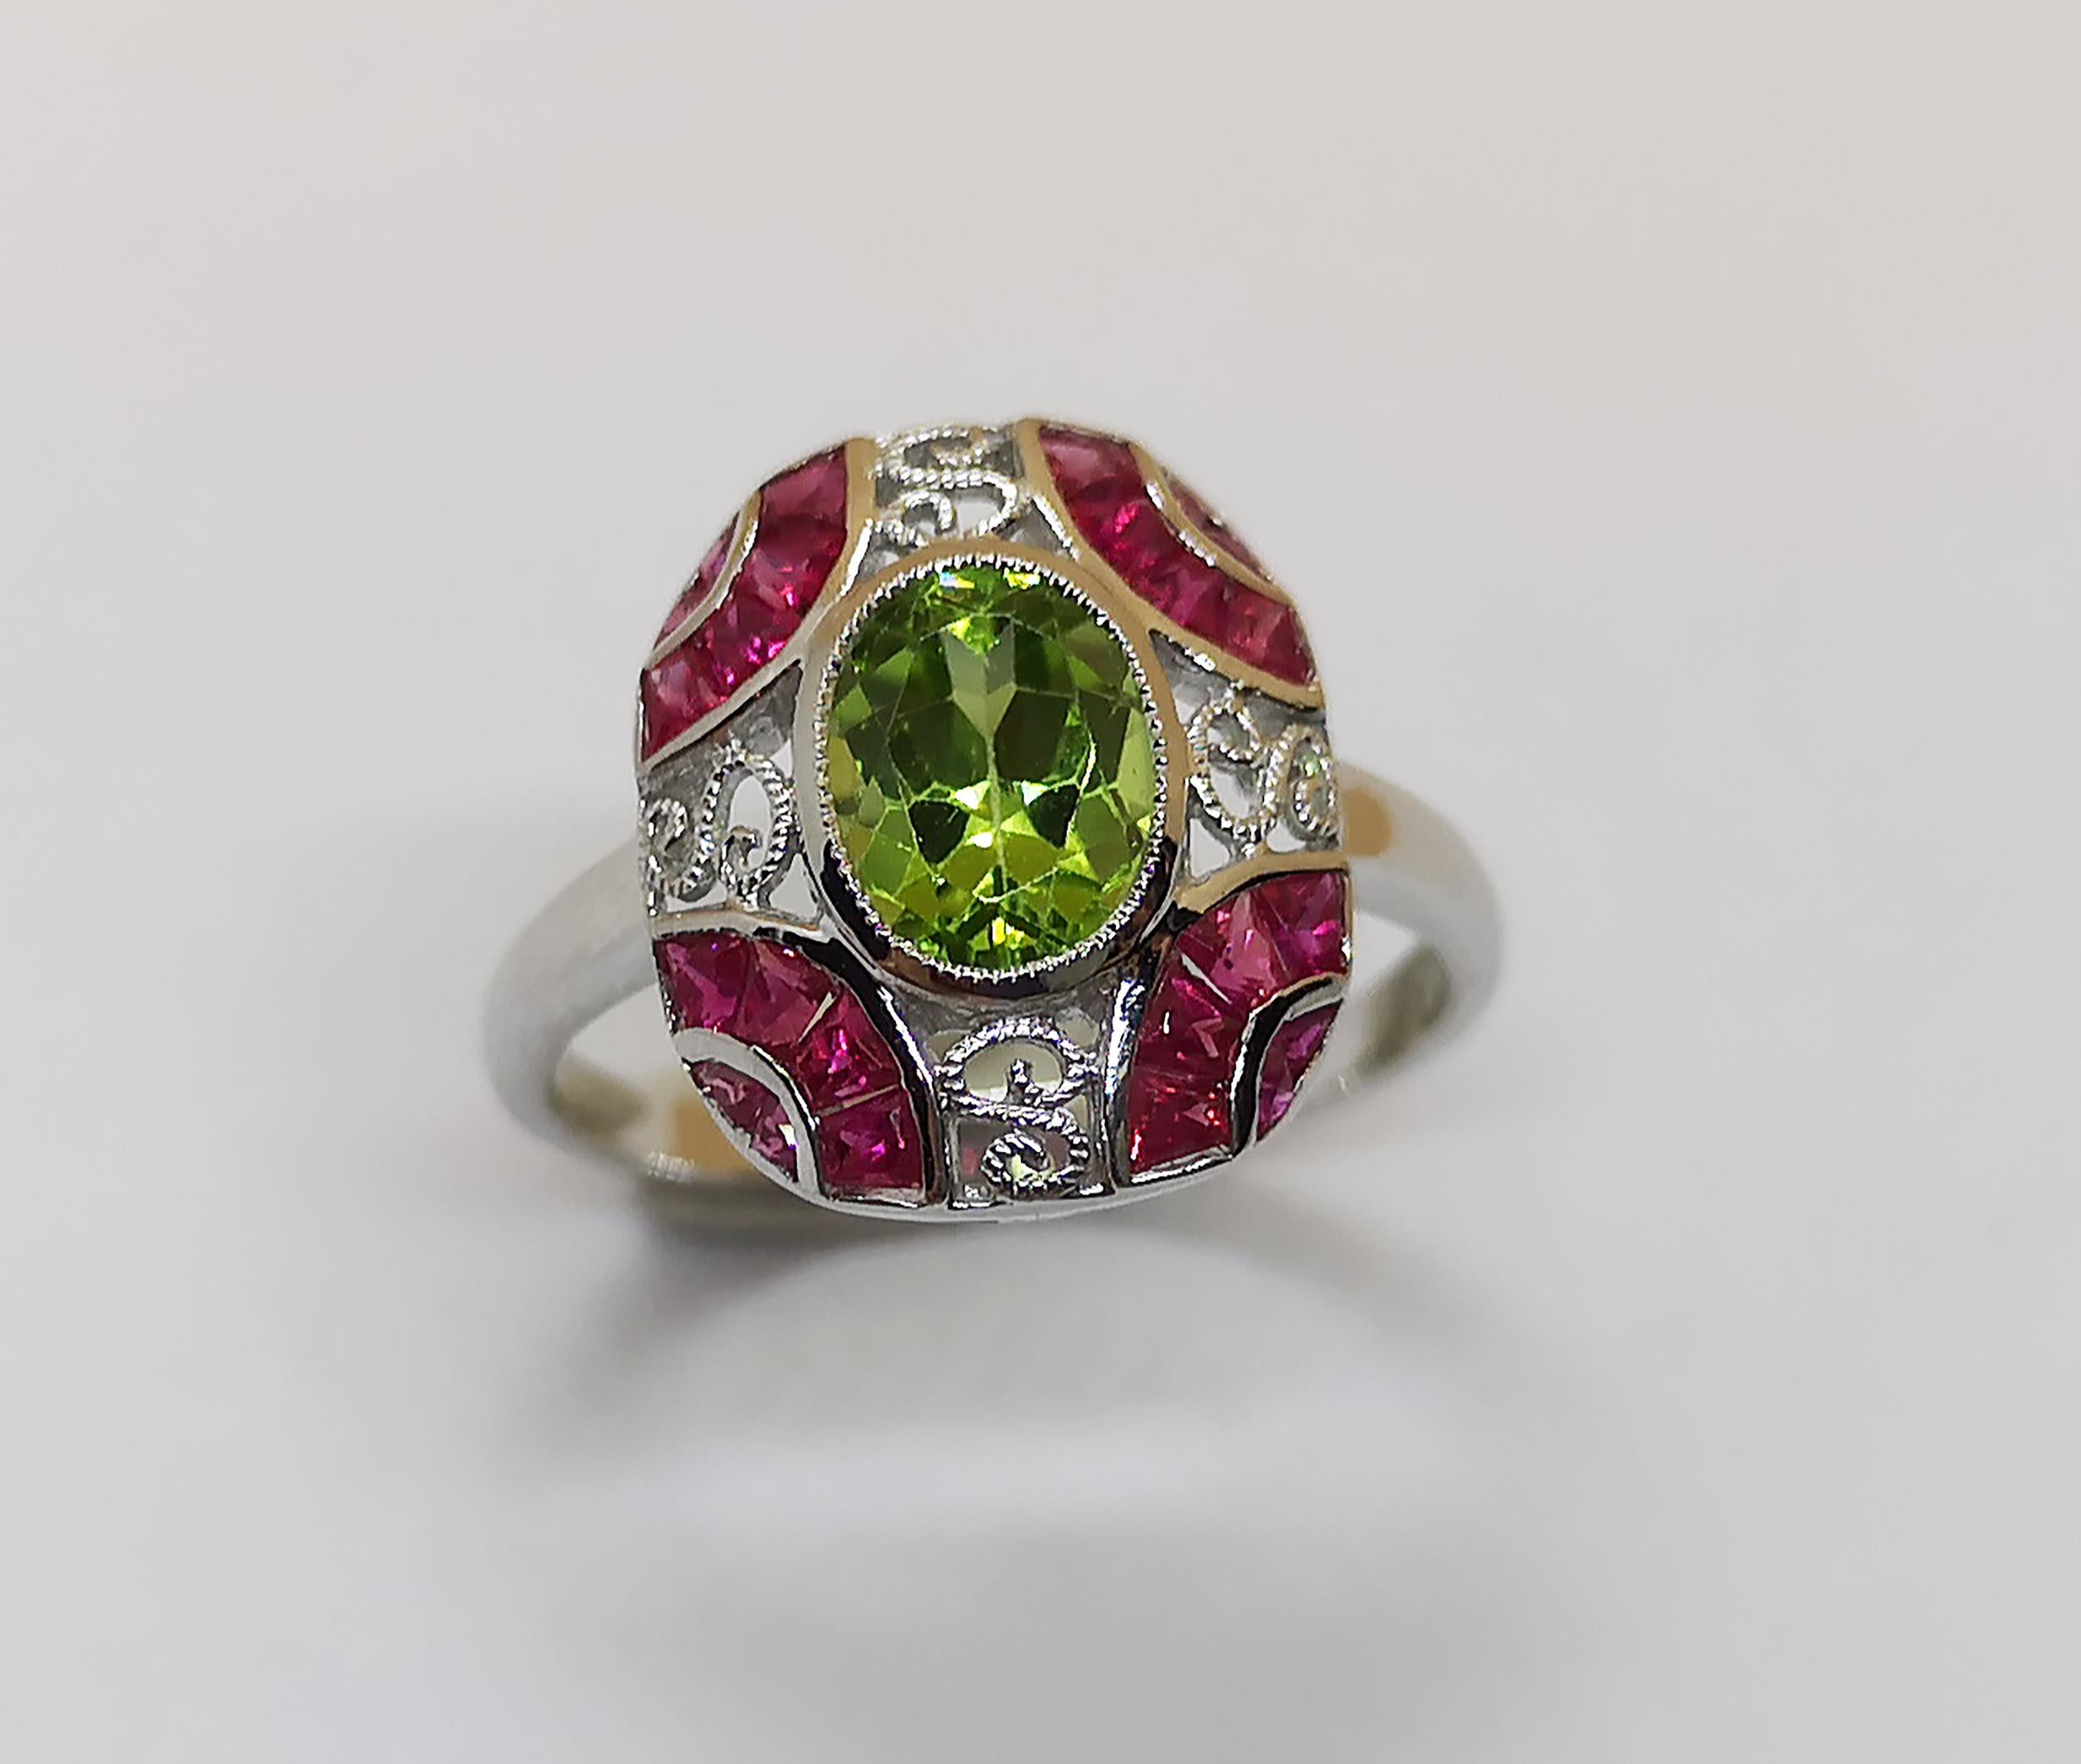 Peridot 1.57 carats with Ruby 1.80 carats Ring set in 18 Karat White Gold Settings 

Width: 1.0 cm
Length: 1.6 cm 
Ring Size: 57

